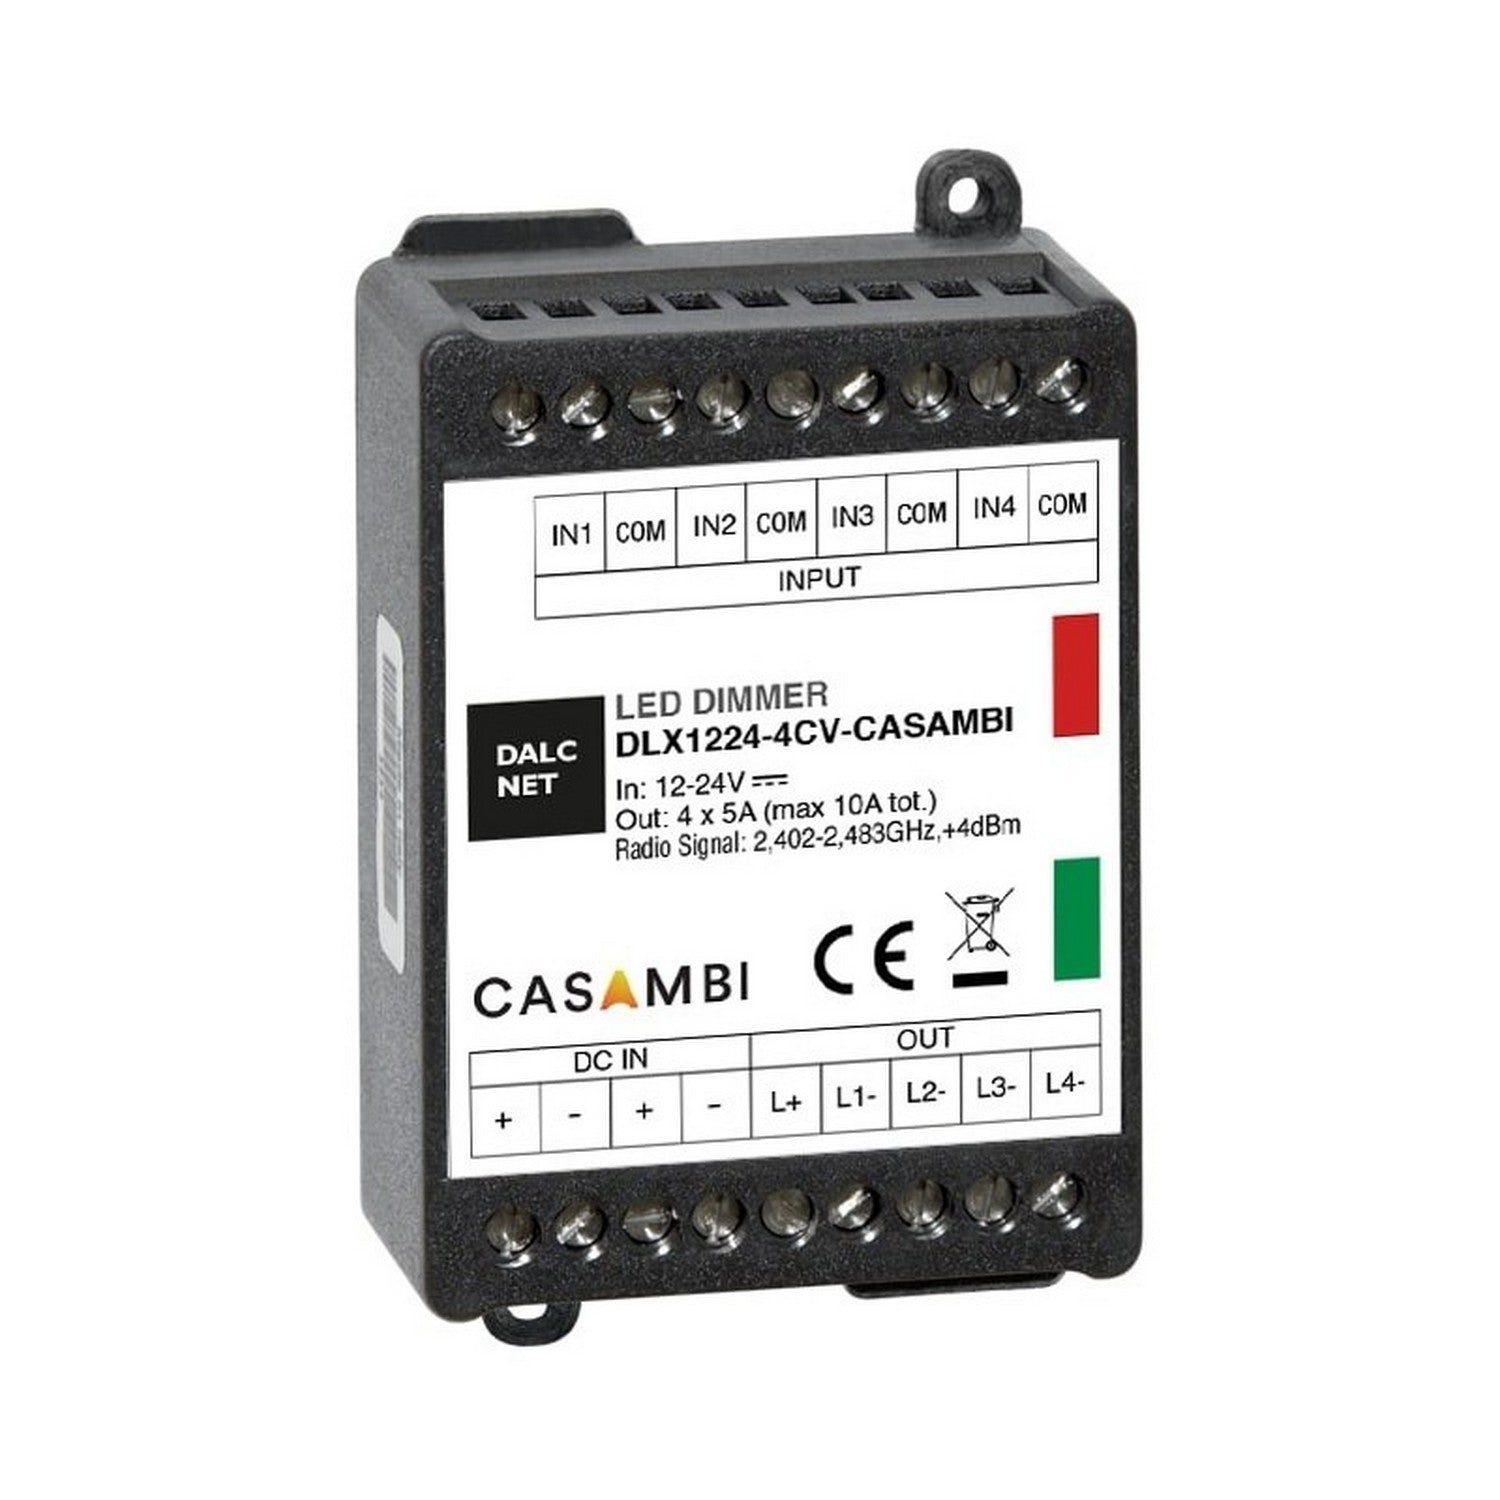 RGBW 4-Channel LED Dimmer with Casambi ~ Model DLX1224-4CV-CASAMBI